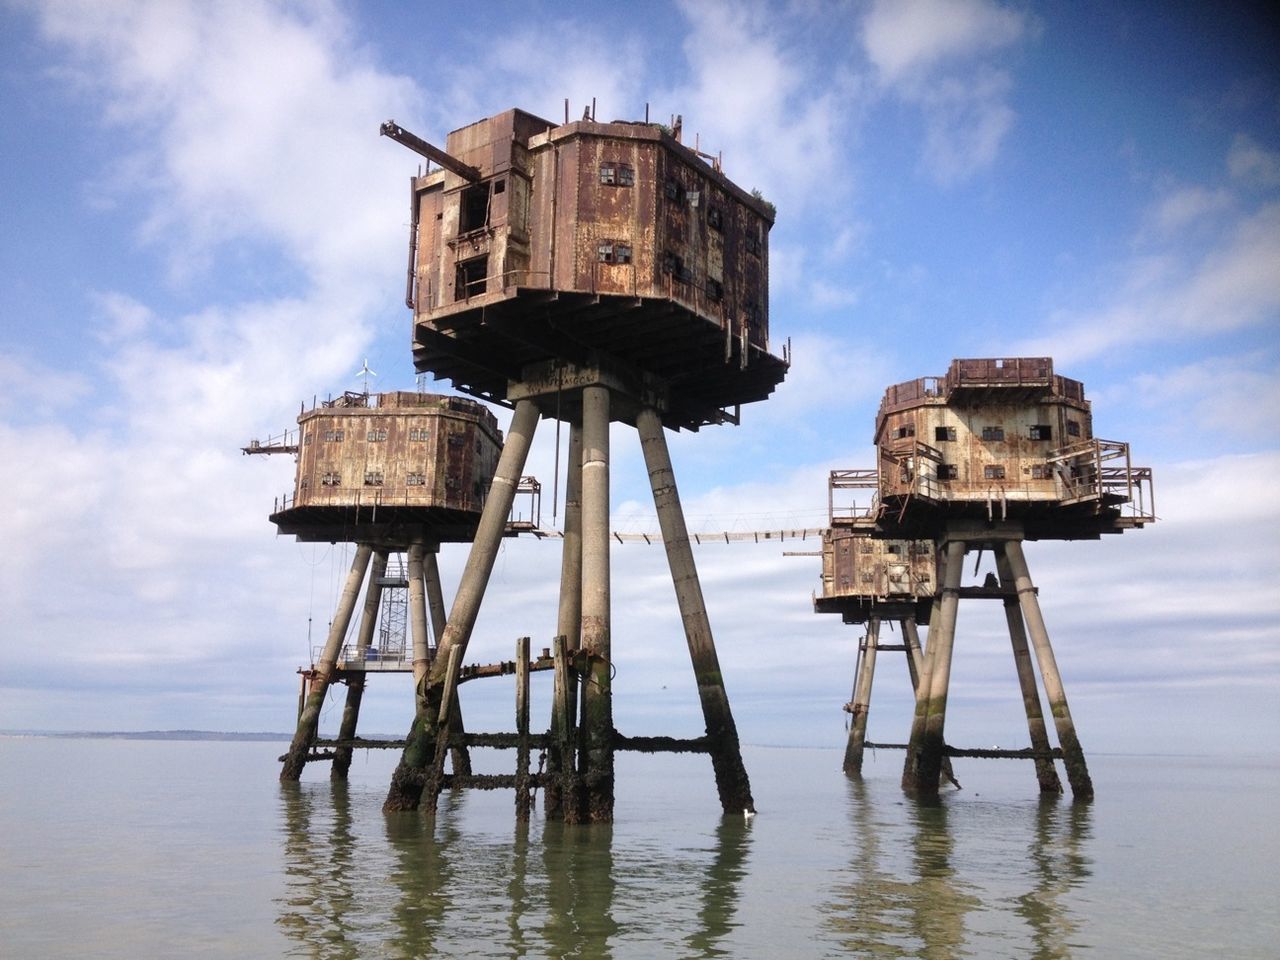 water, sky, sea, cloud - sky, built structure, architecture, old, horizon over water, abandoned, building exterior, cloud, obsolete, cloudy, outdoors, damaged, history, day, nature, beach, low angle view